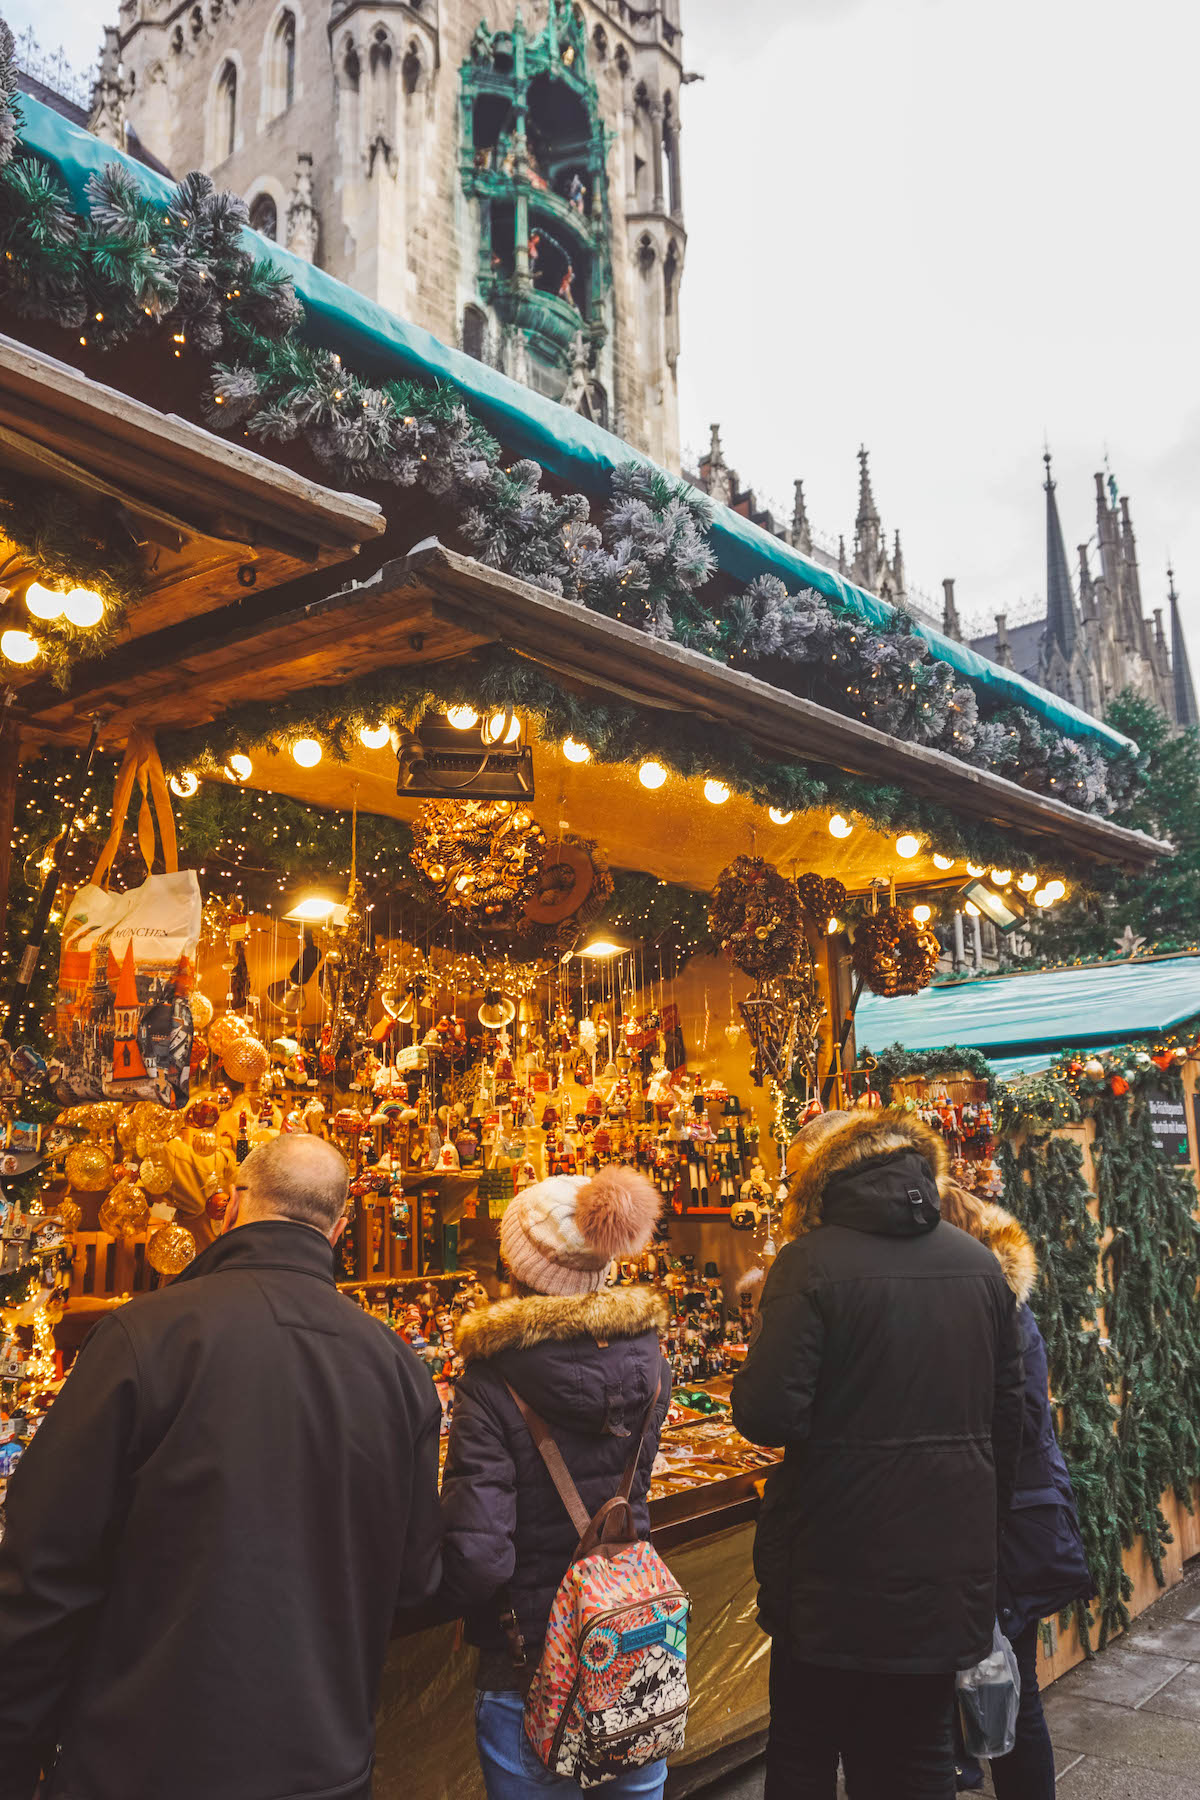 A stall at the Christkindlmarkt Christmas market in Munich 